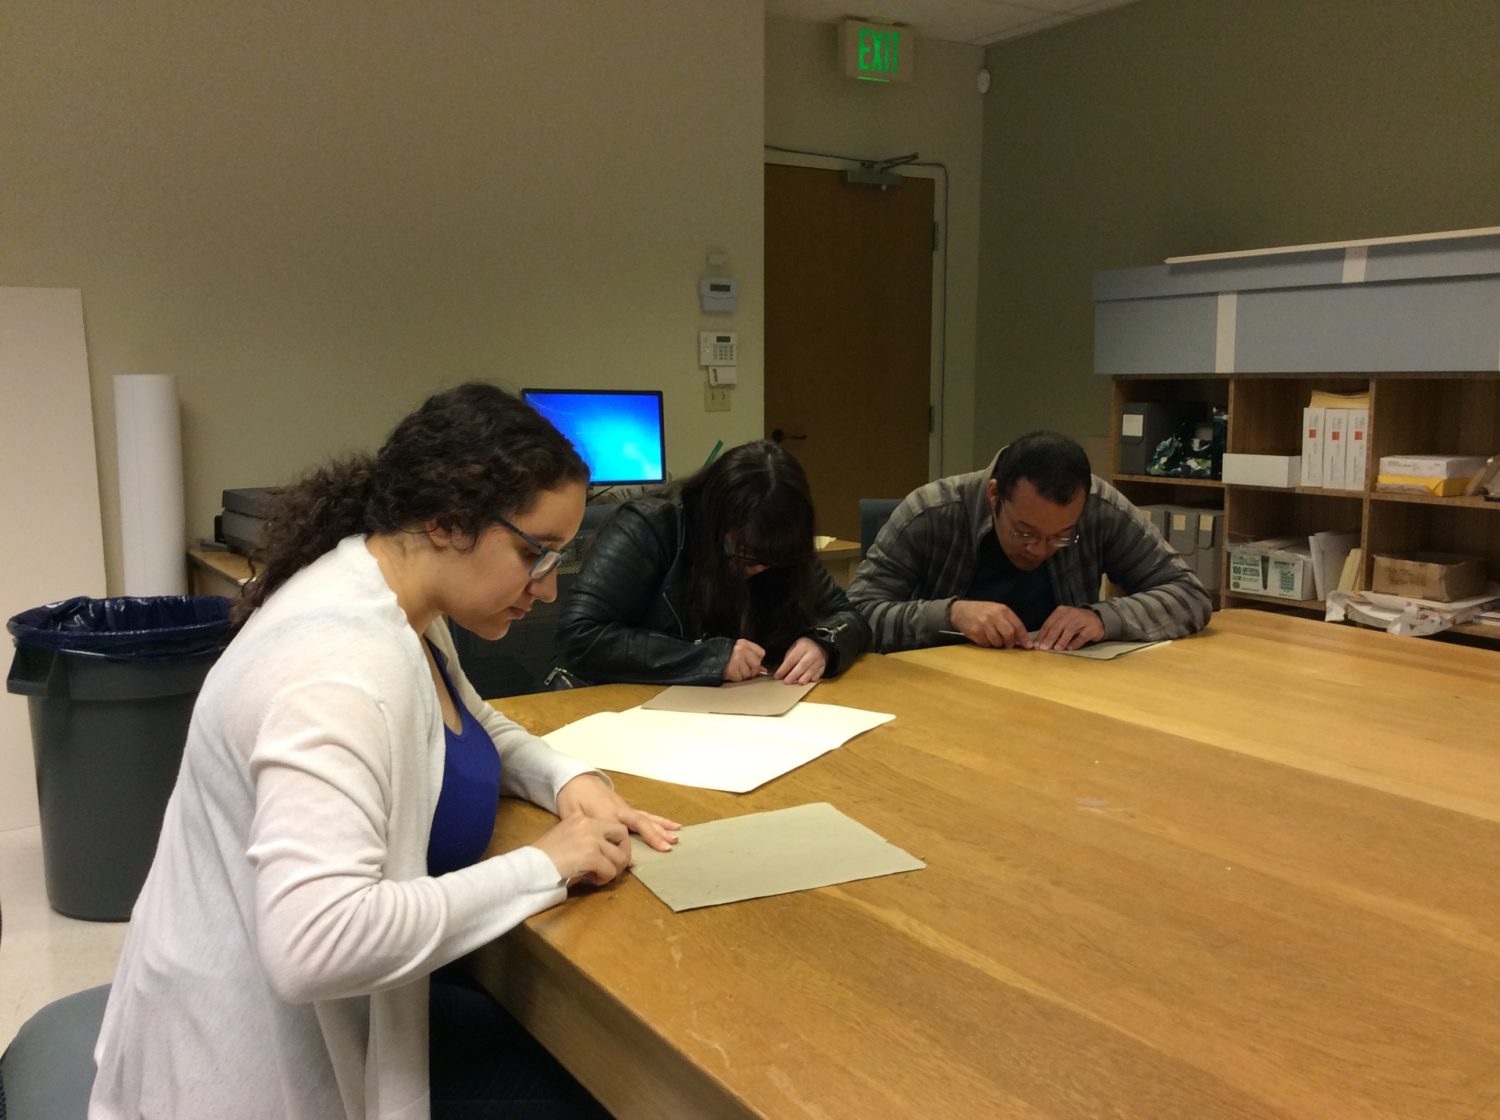 Three students examine documents at a large wooden table.